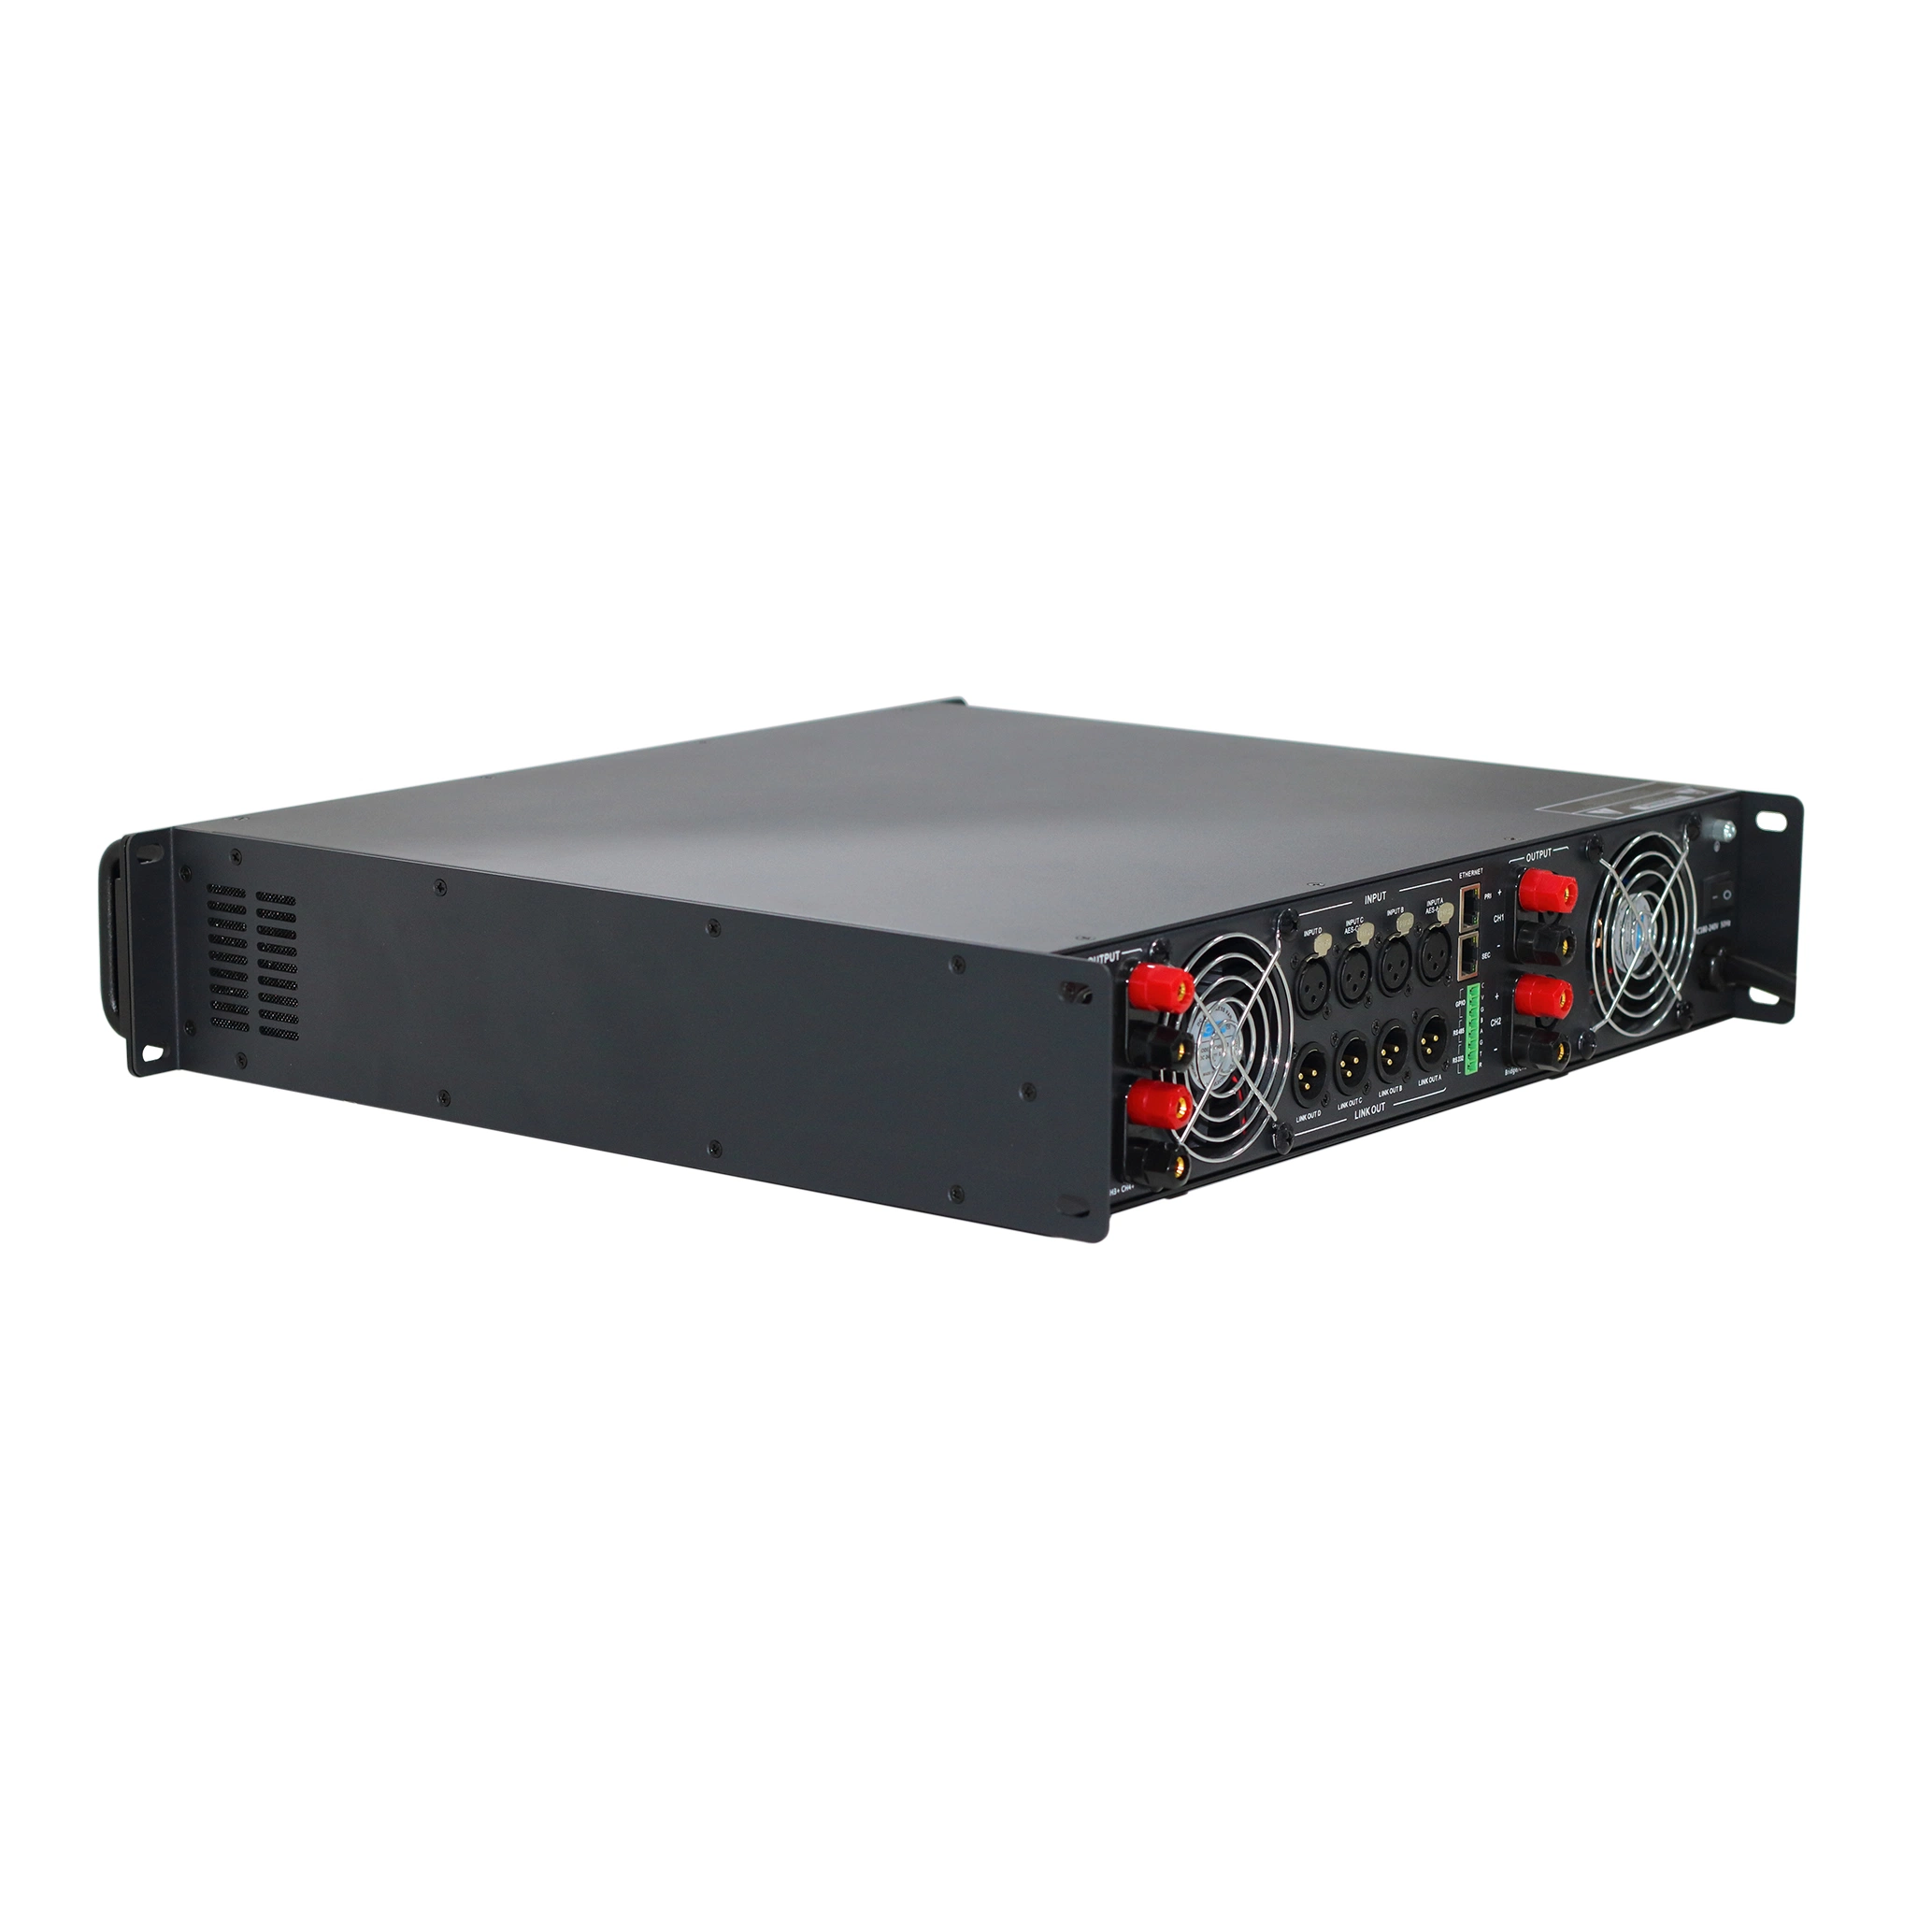 Professional Audio Network 4 Channels 1000W 8 Ohm Power Sound Amplifier with DSP Software Control System